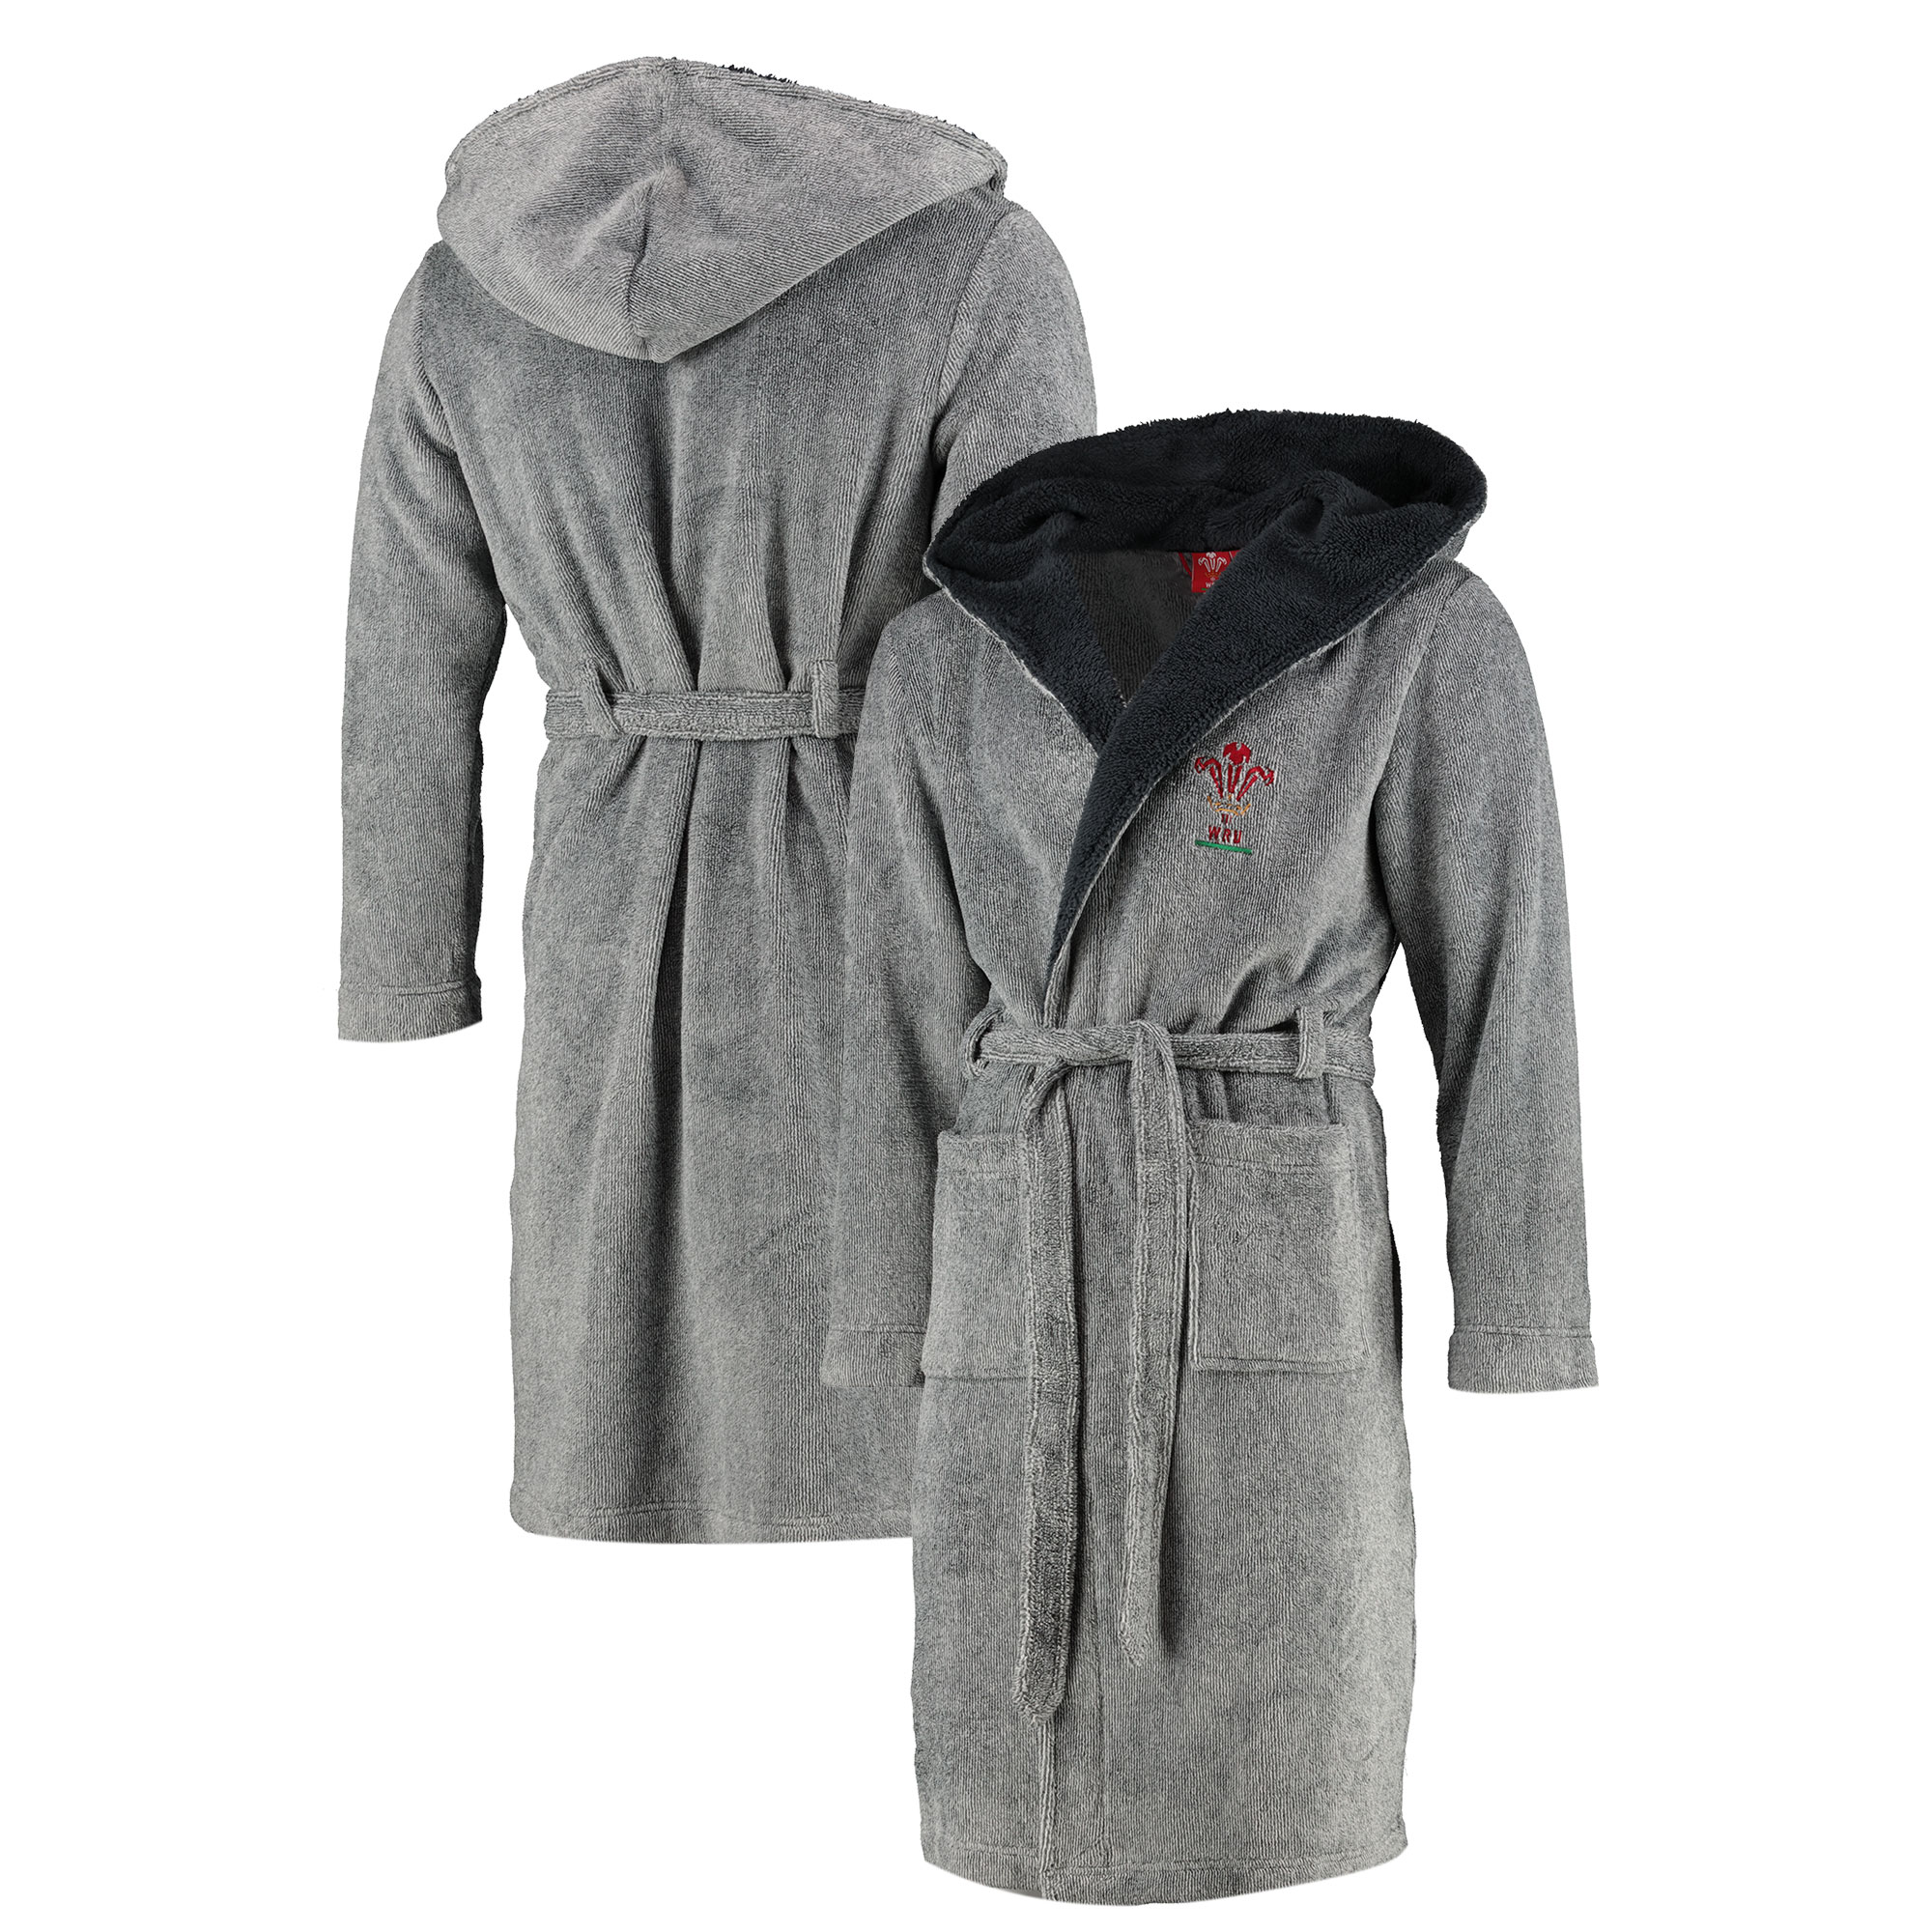 Welsh Rugby Hooded Robe - Charcoal - Mens